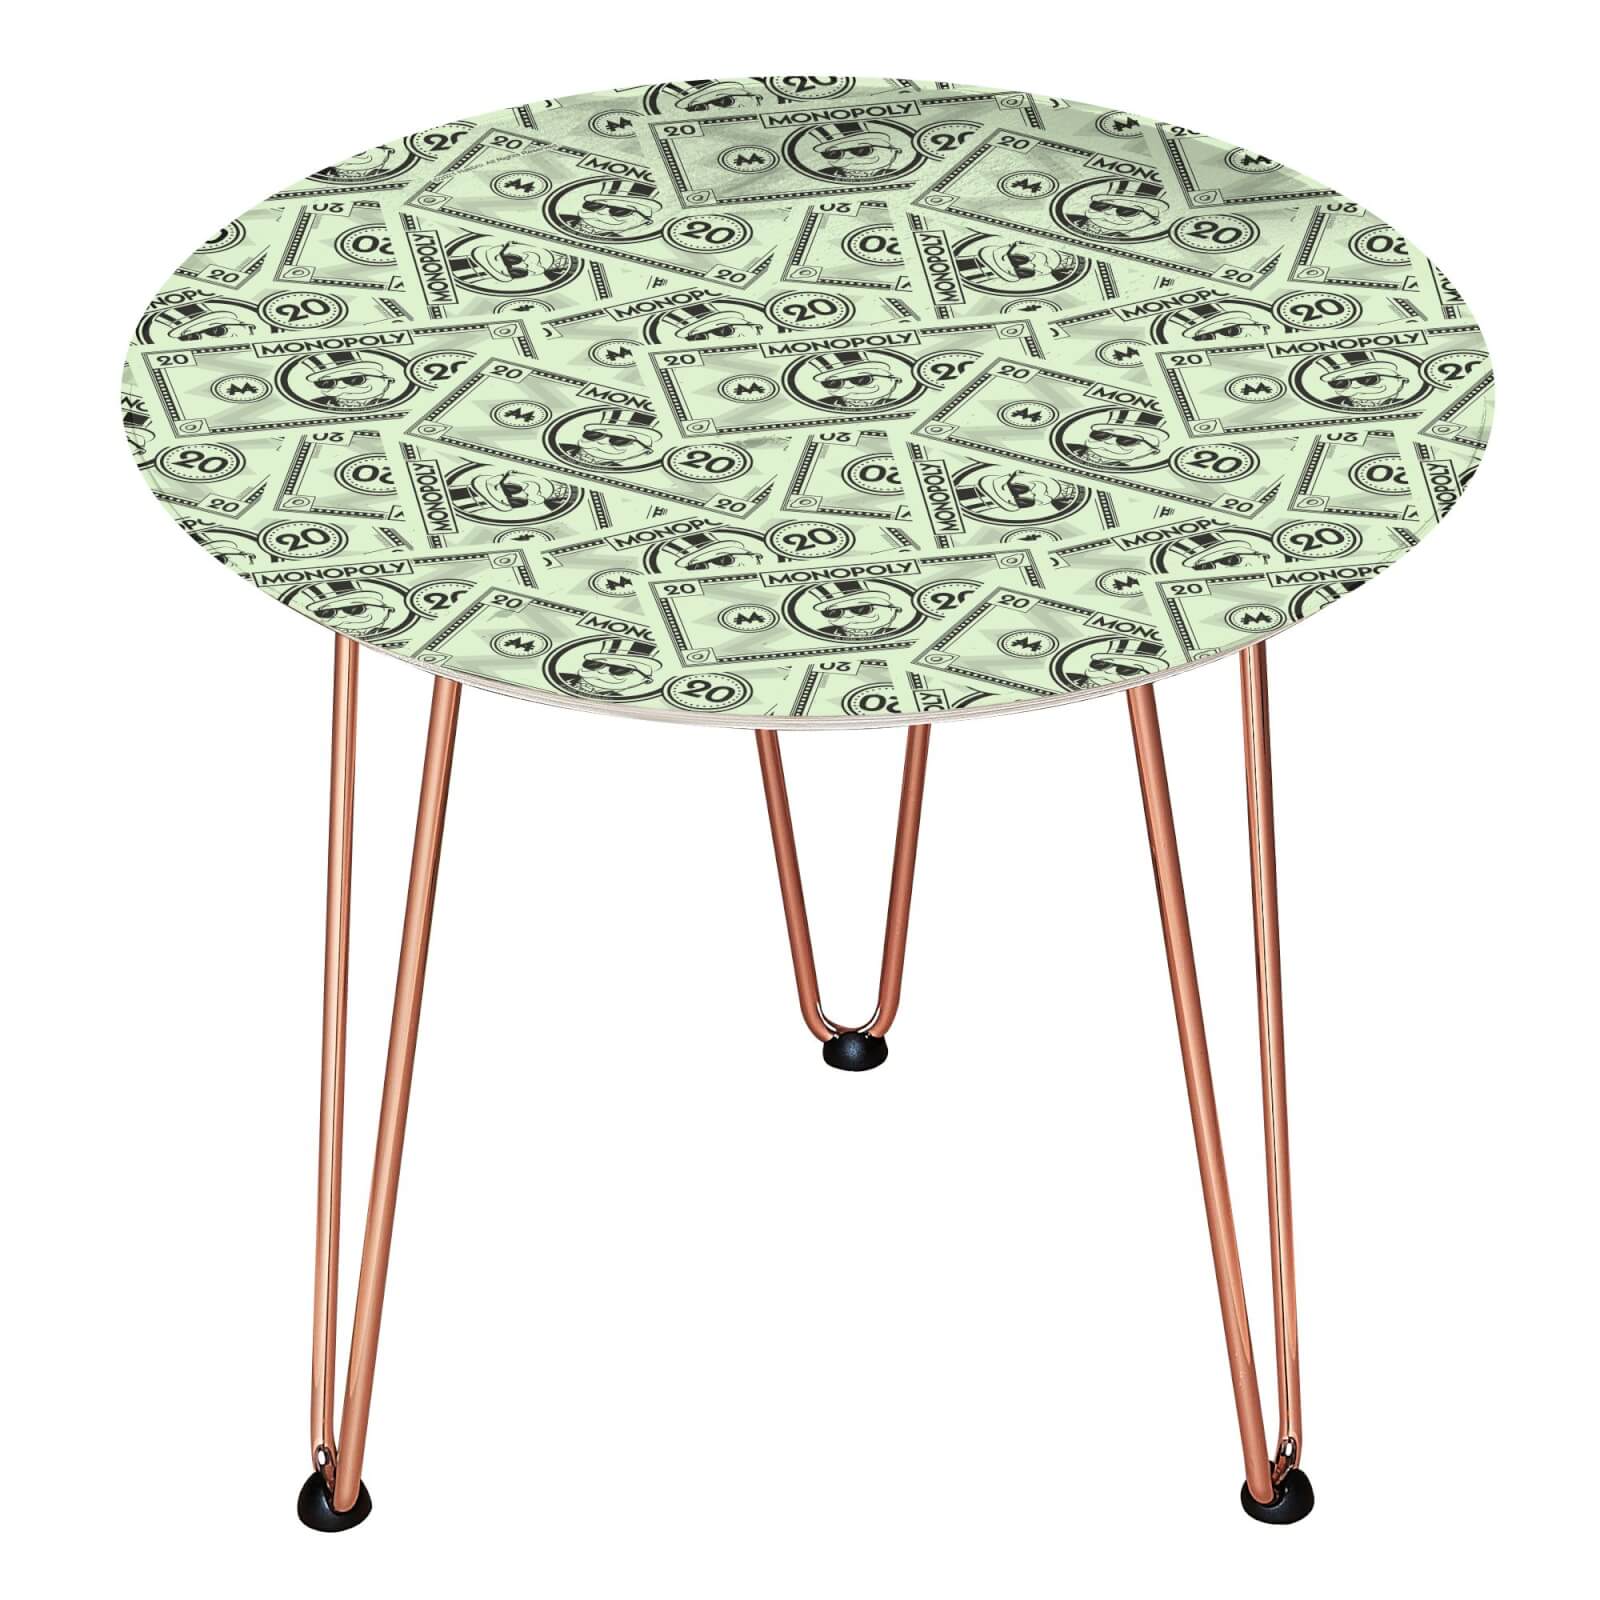 Decorsome Monopoly Money 20 Wooden Side Table - Gold